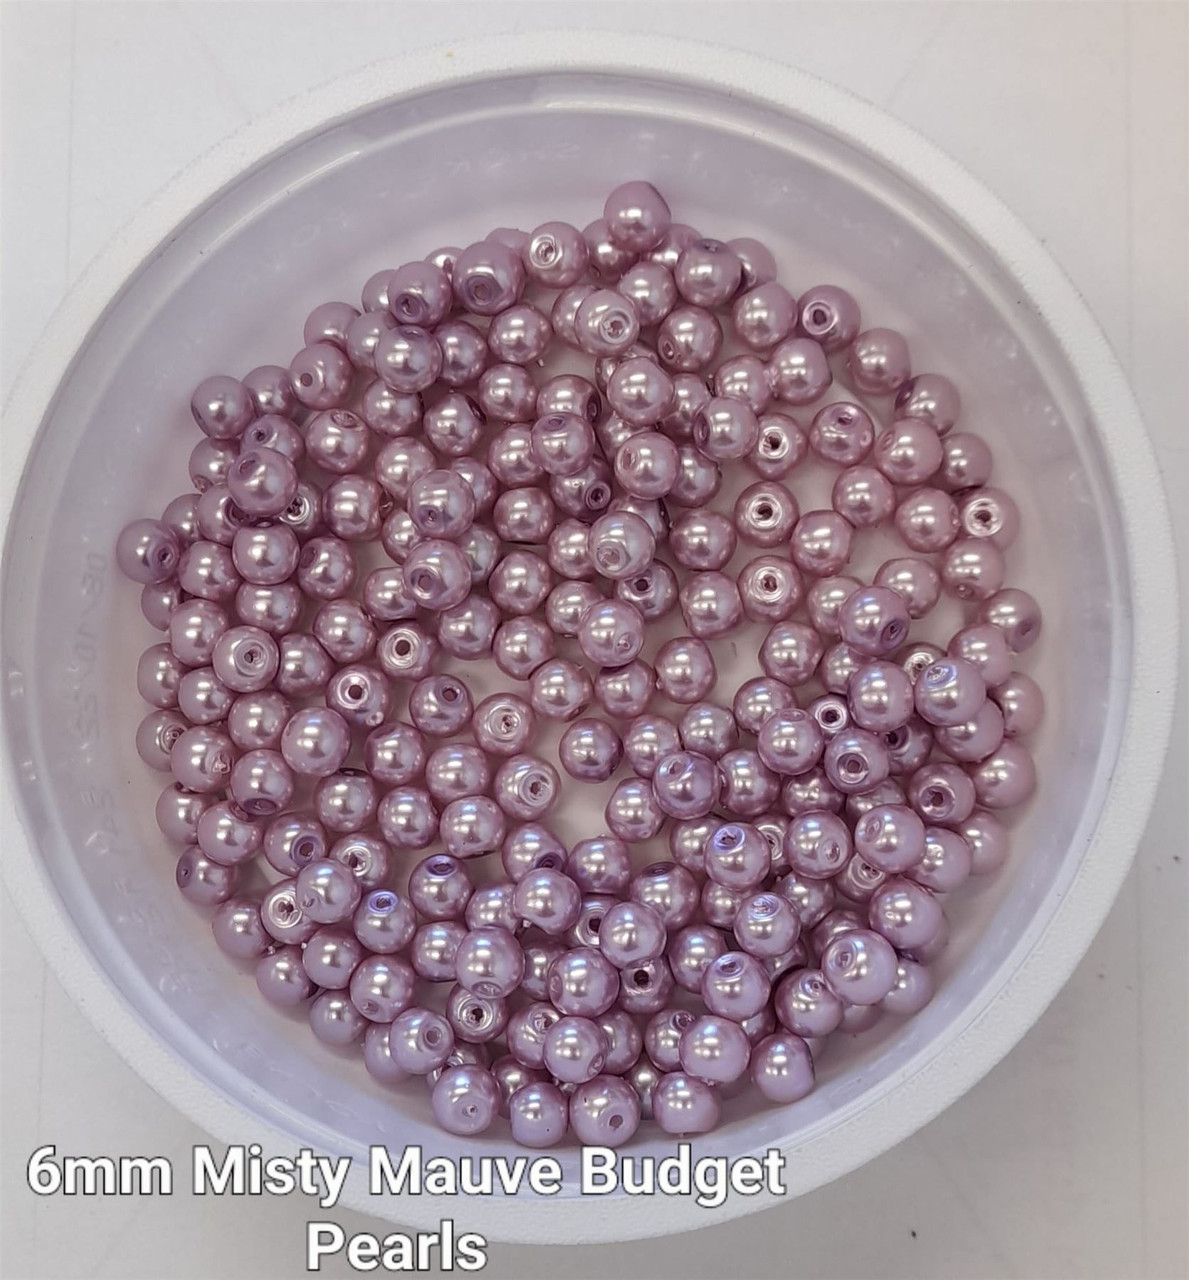 4mm budget Glass Pearls - Misty Mauve (500 beads)